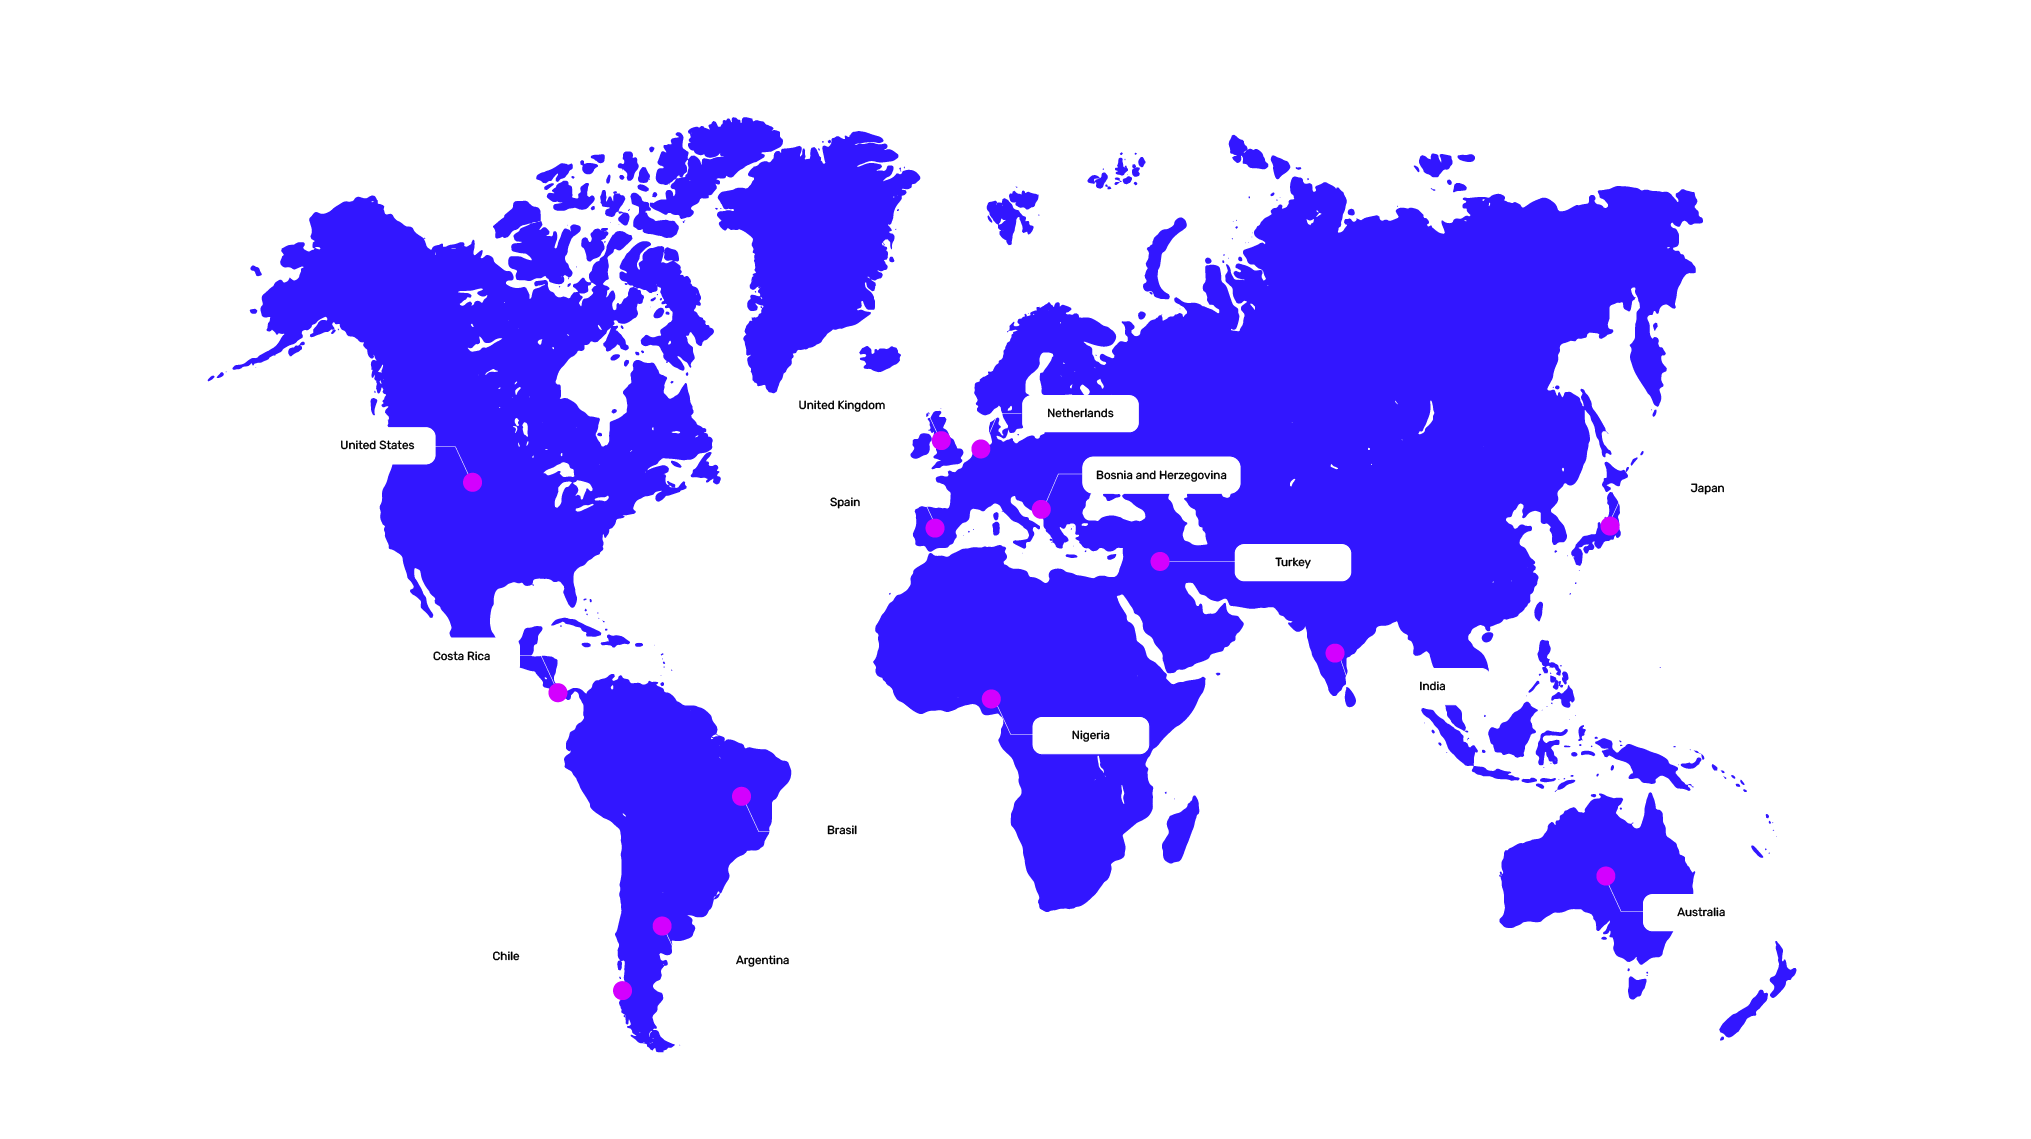 World map highlighting the locations of Calyptia team members, and showing that we have people on every continent except Antartica